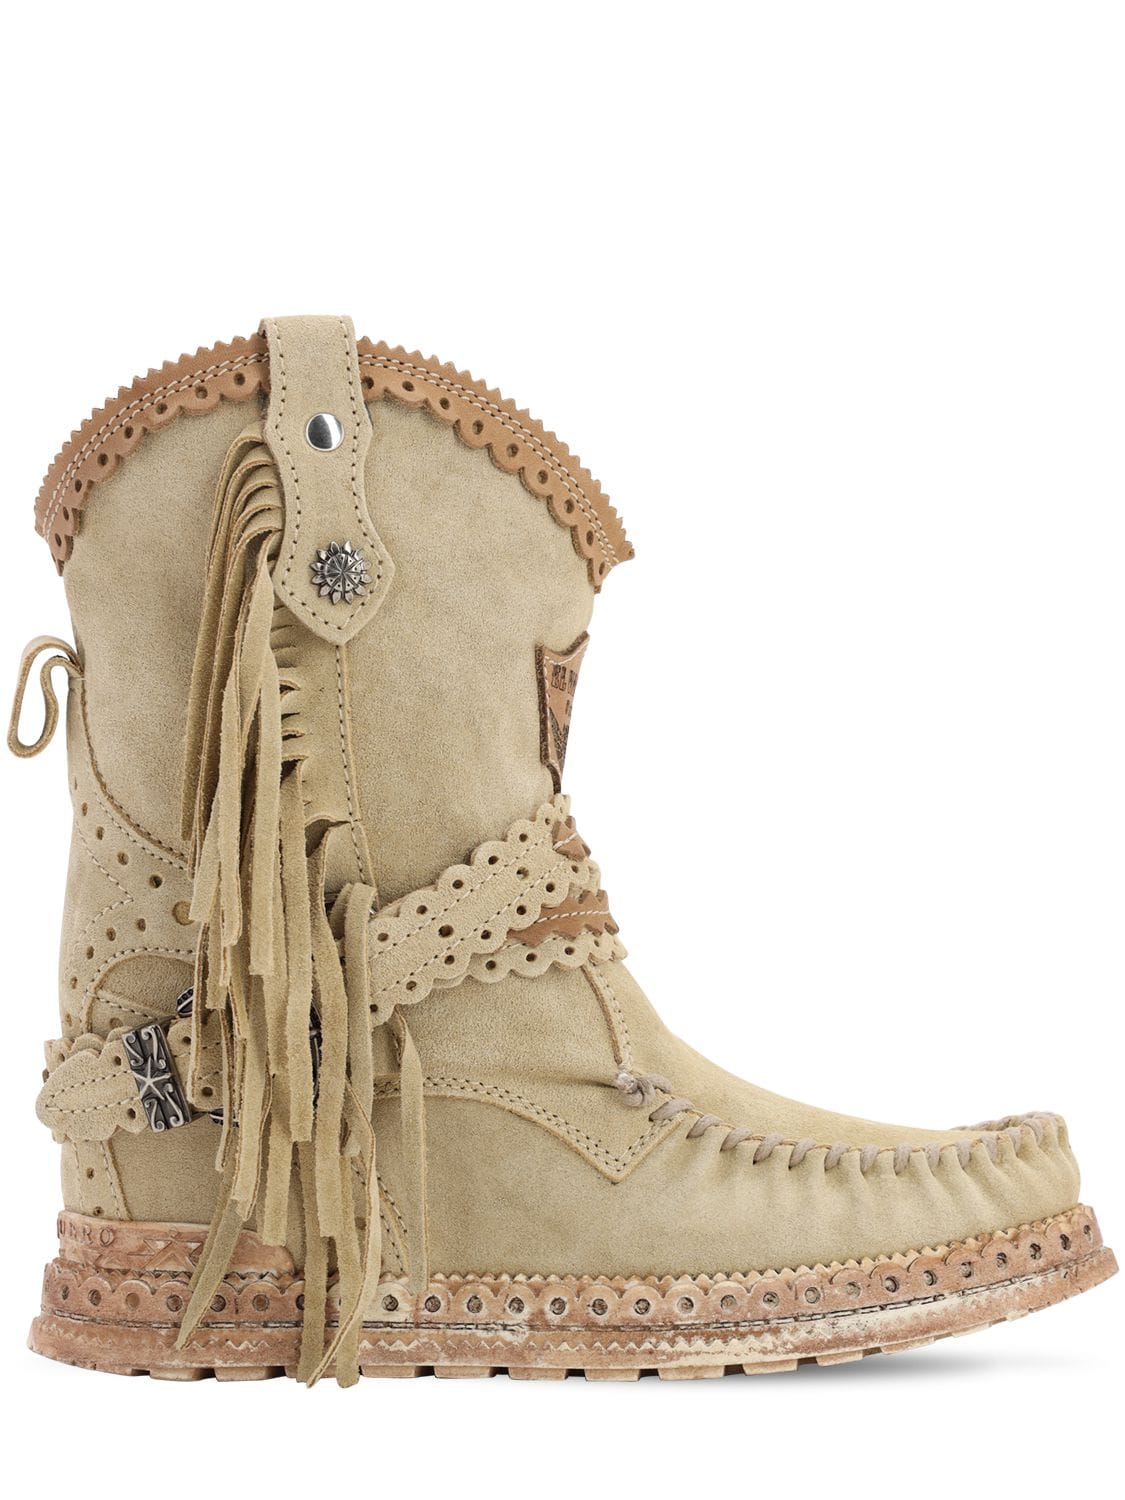 El Vaquero 70mm Arya Fringed Leather Boots In Beige